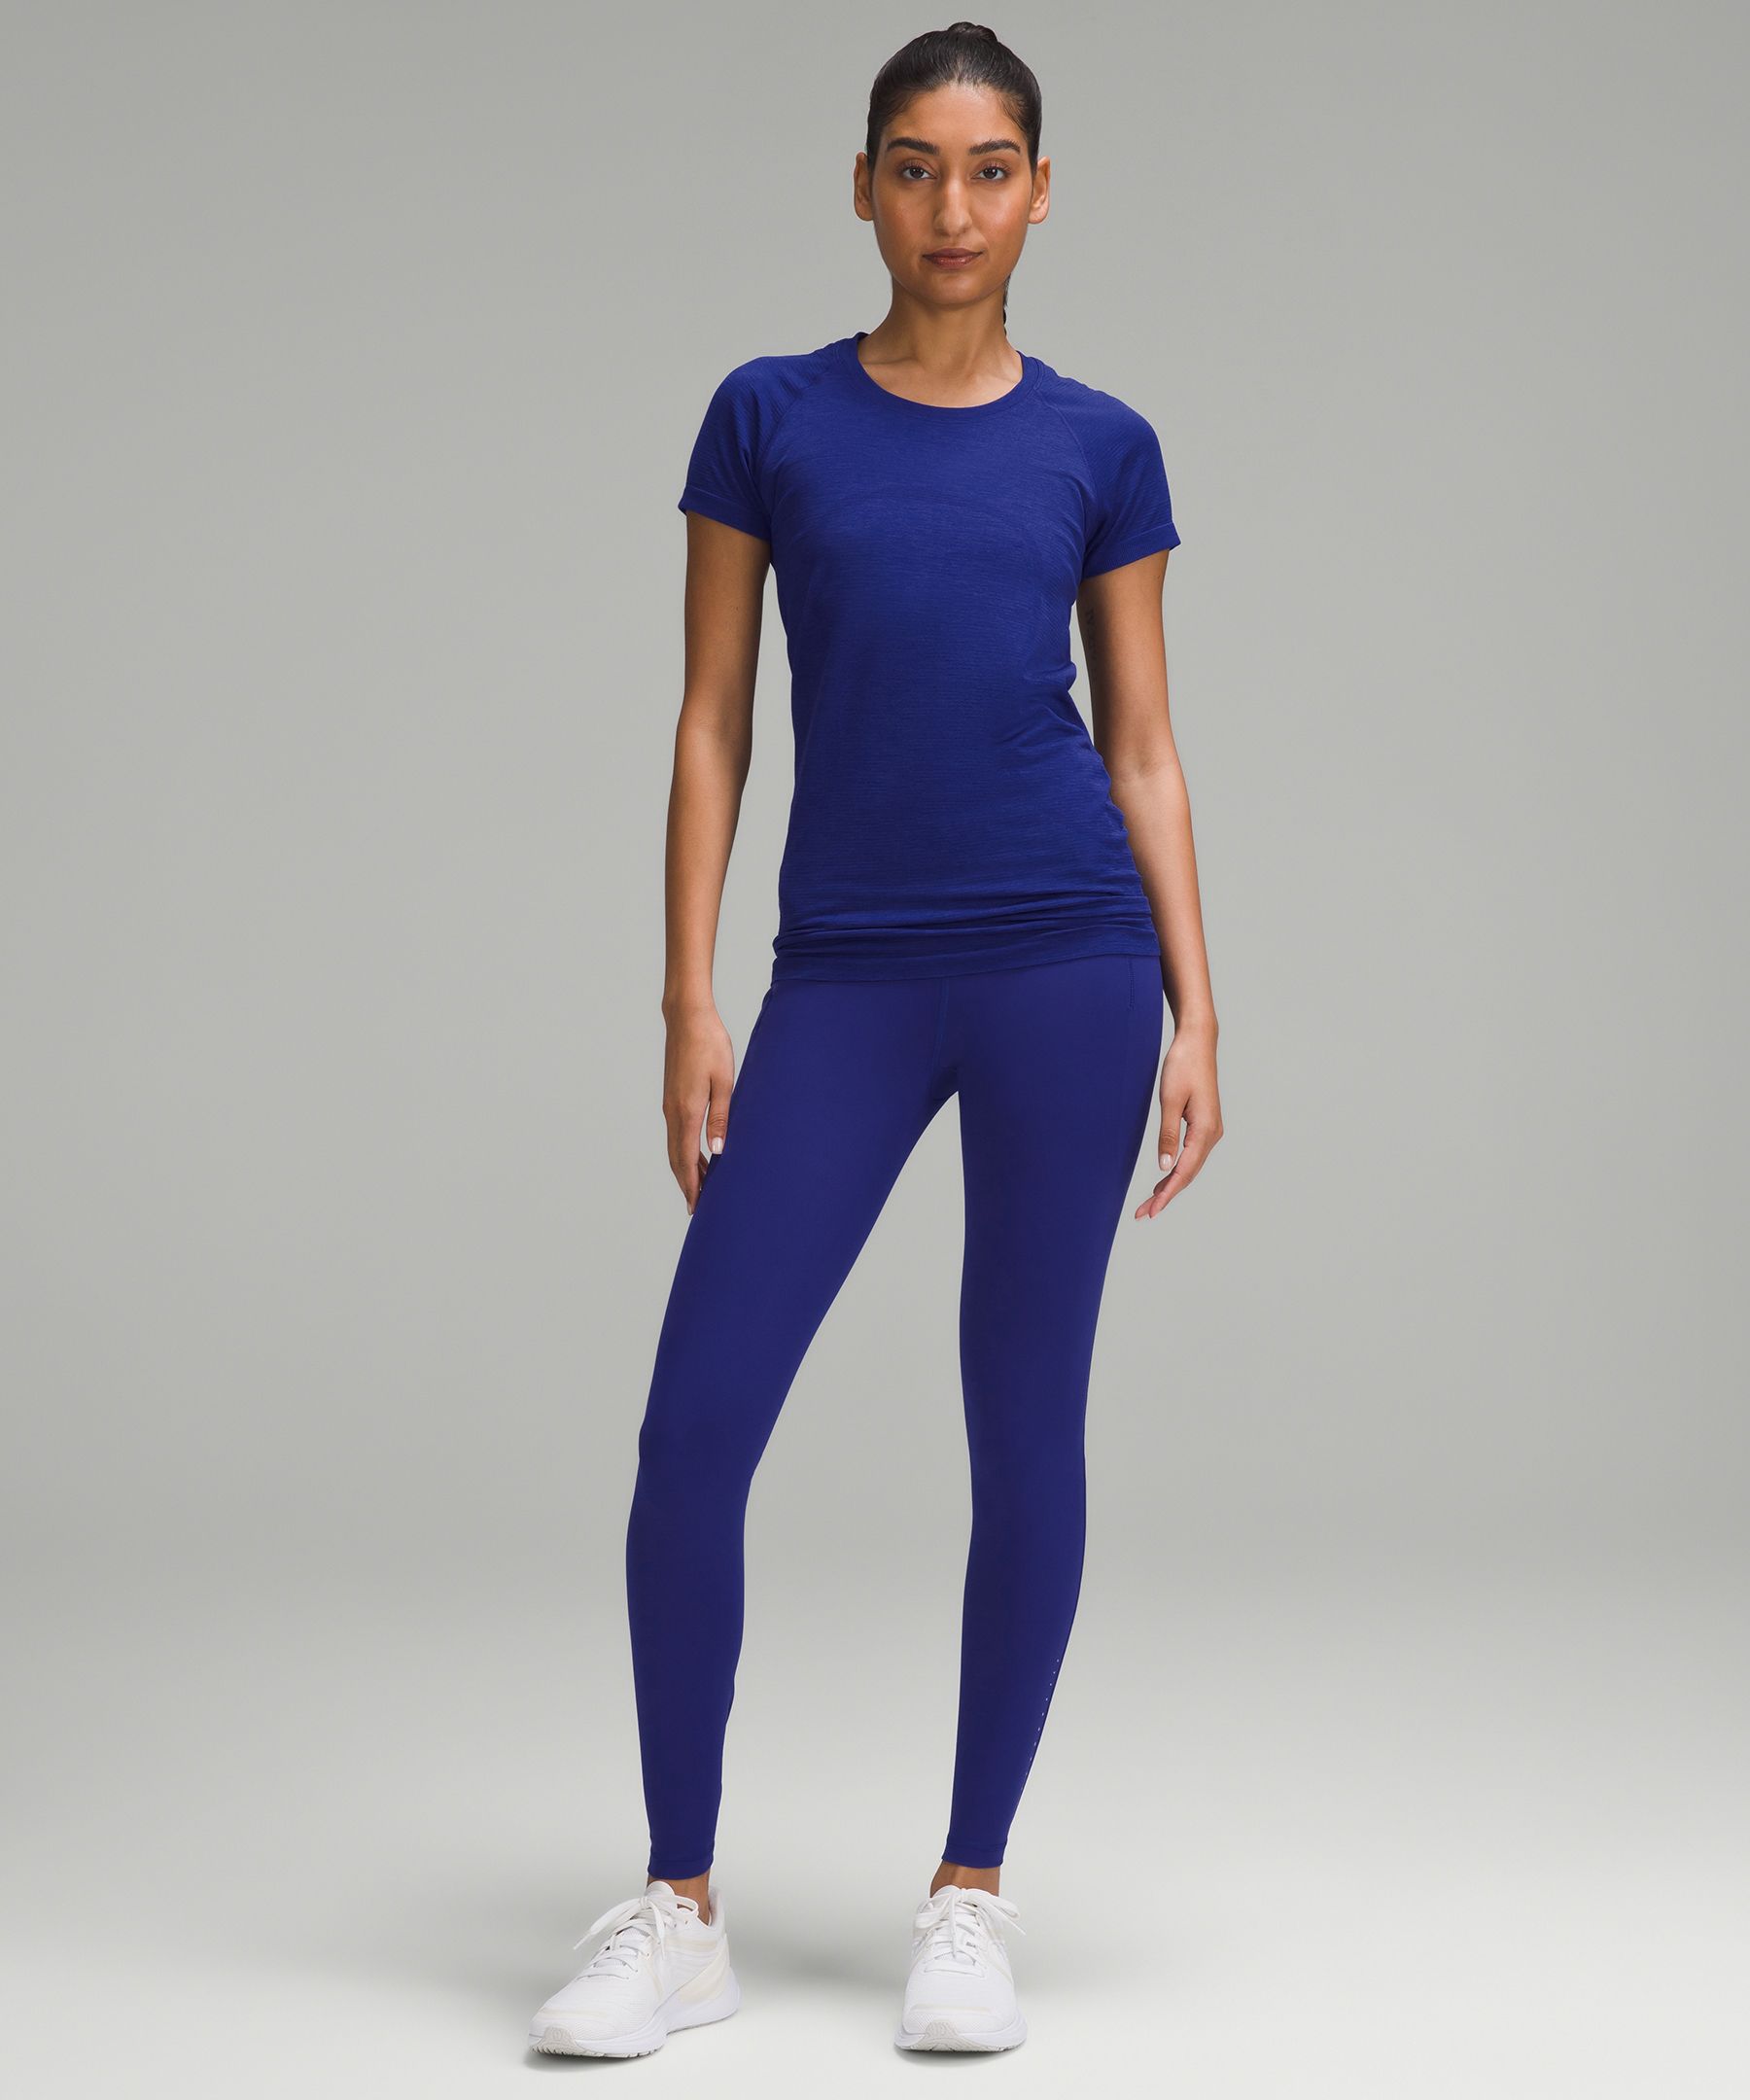 Lululemon Swift Speed High-Rise Tights I Editor Review